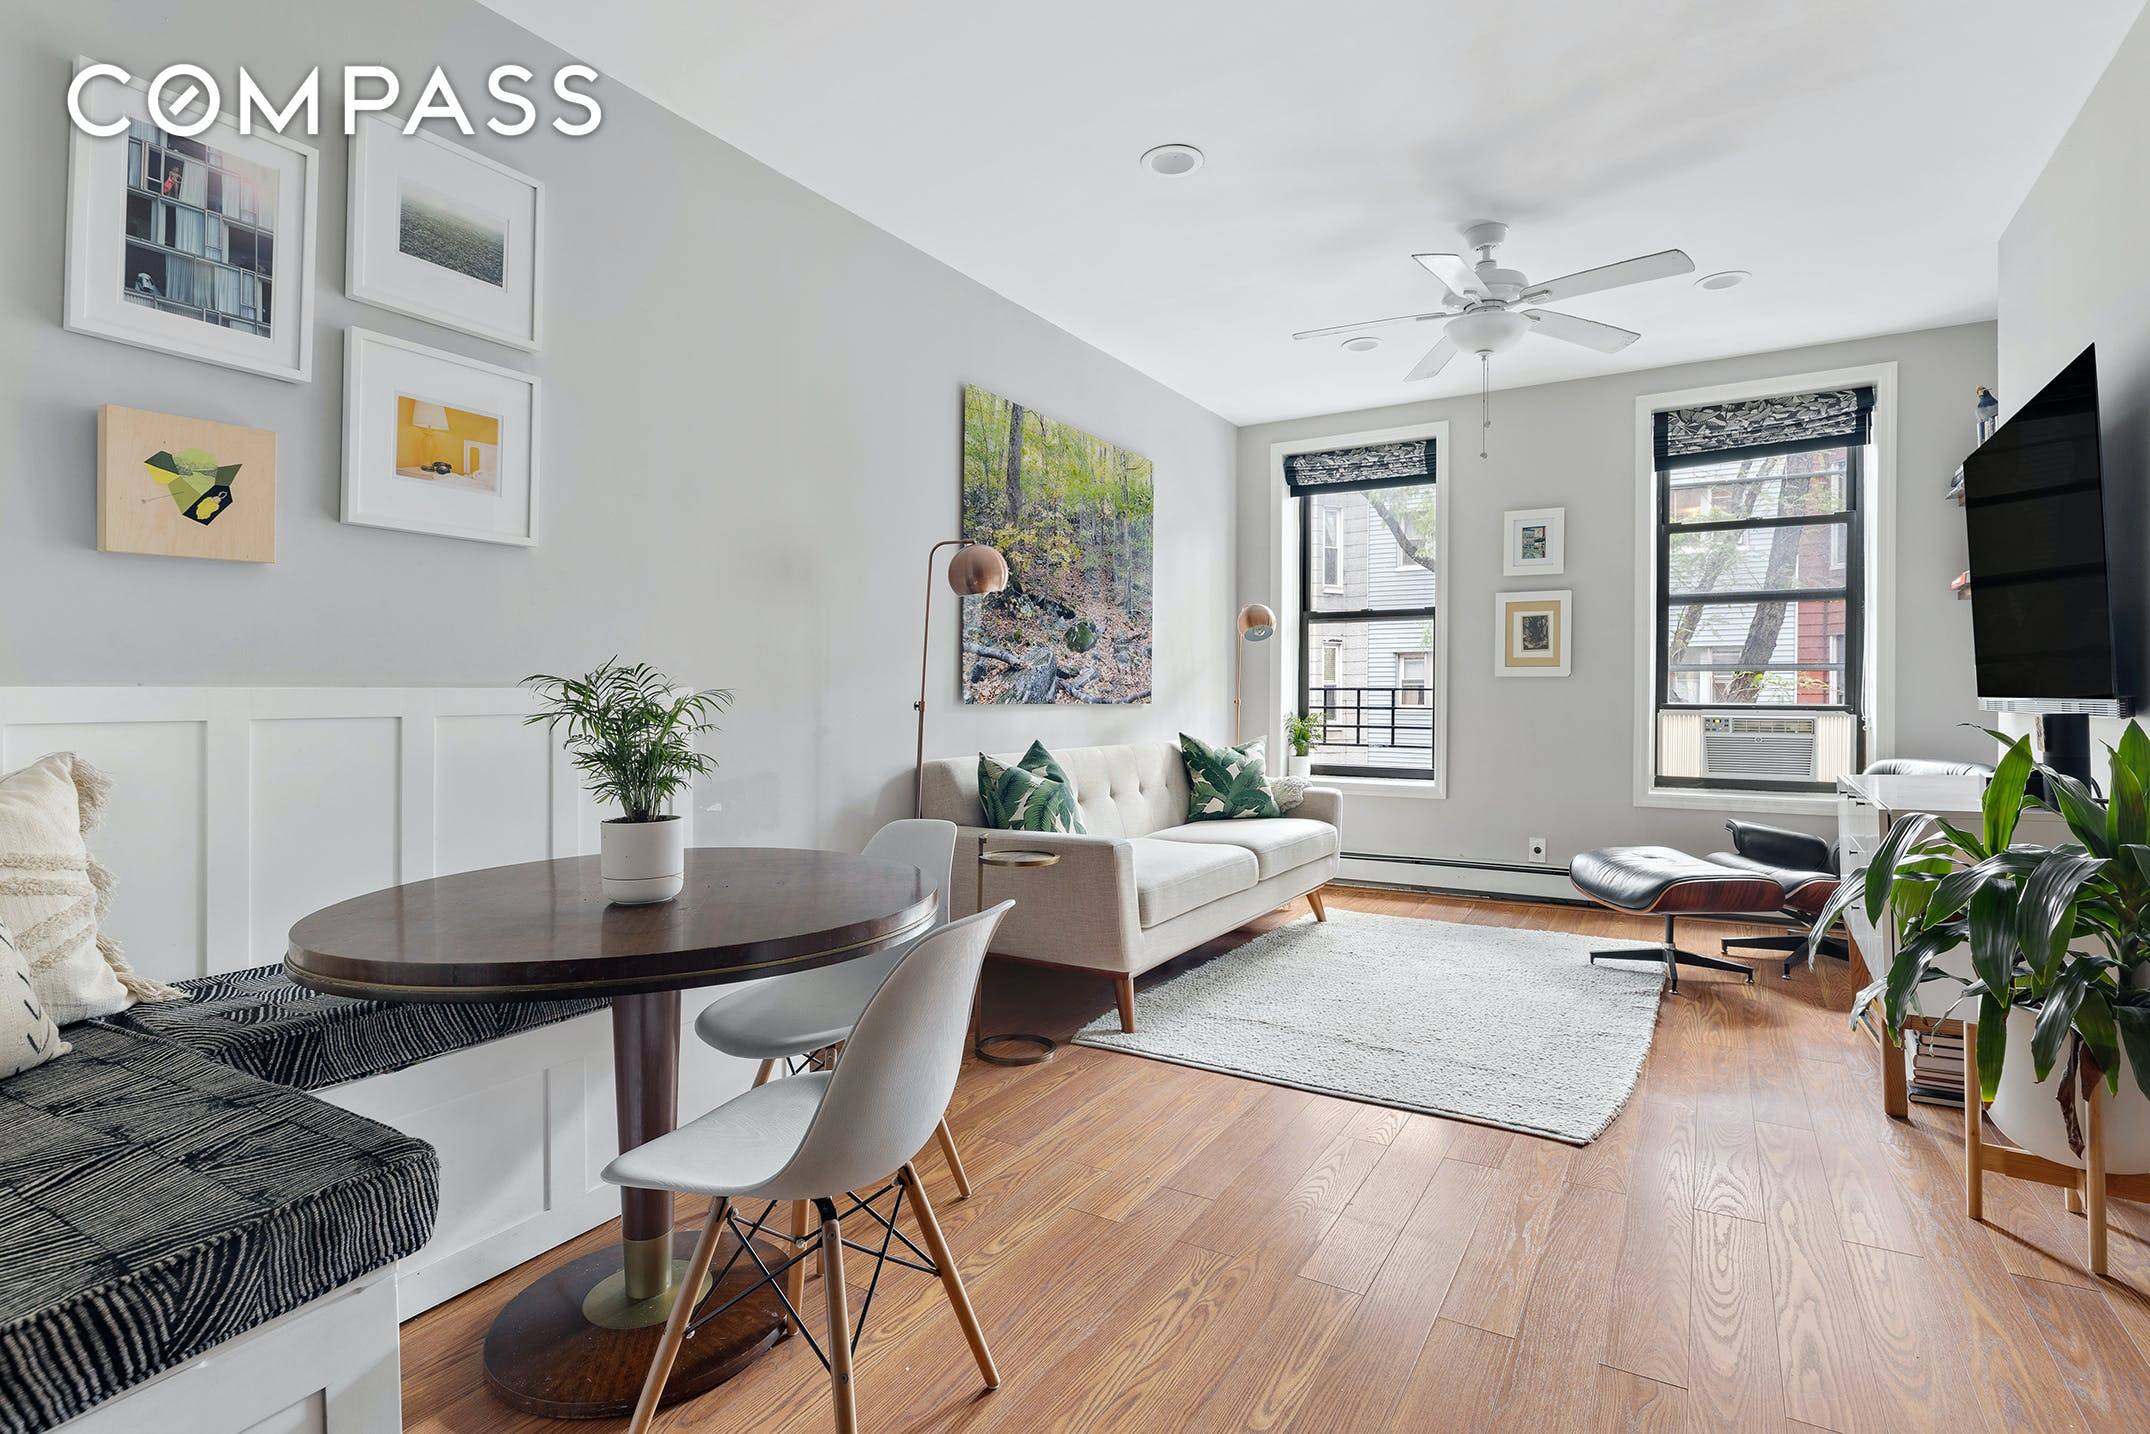 137 Guernsey is nestled among one of the most beautiful tree populated streets of Greenpoint.